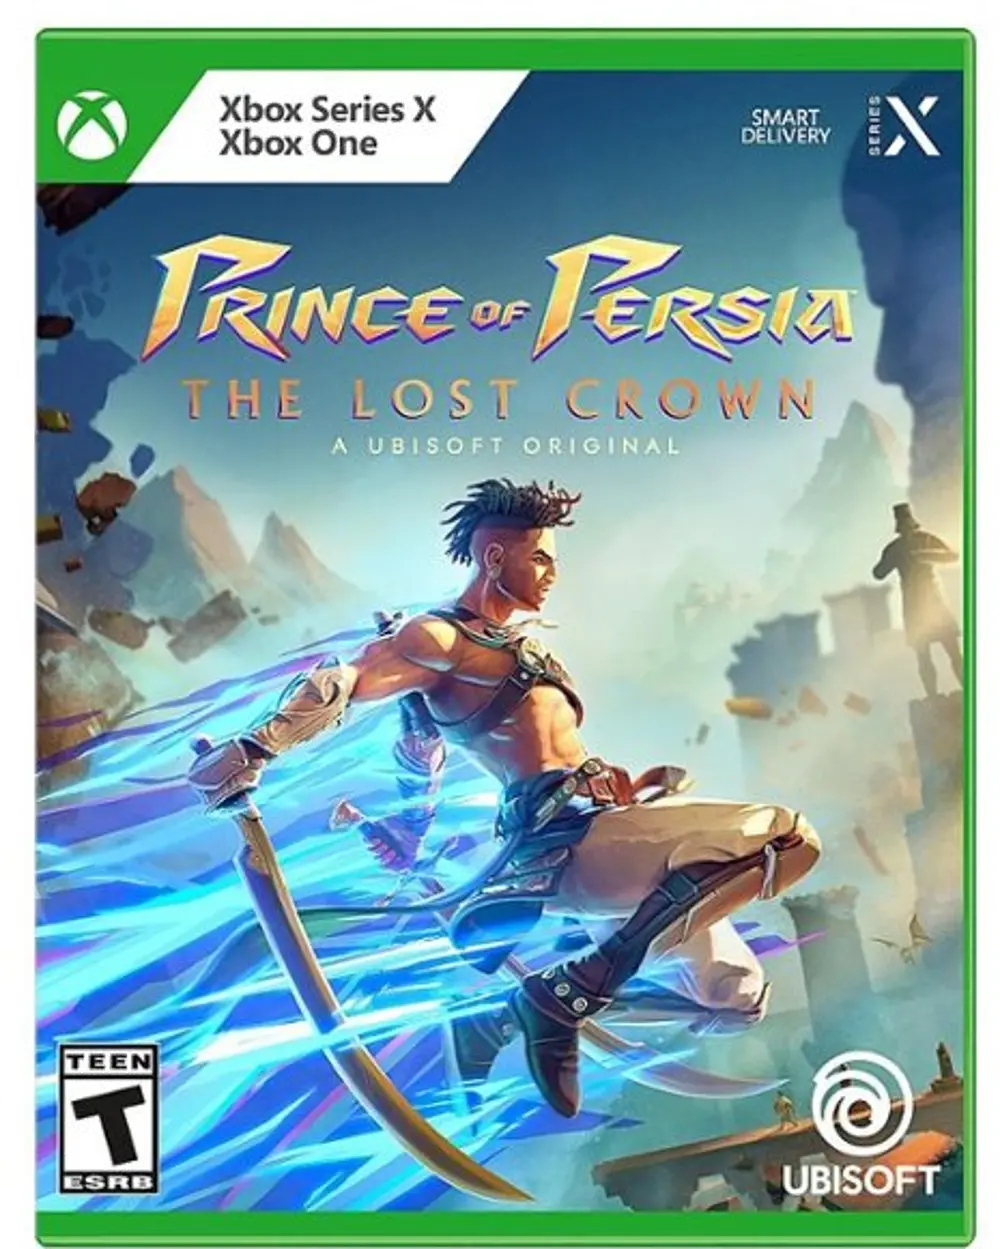 UB512605XBX Prince of Persia: The Lost Crown Standard Edition - Xbox Series X-1